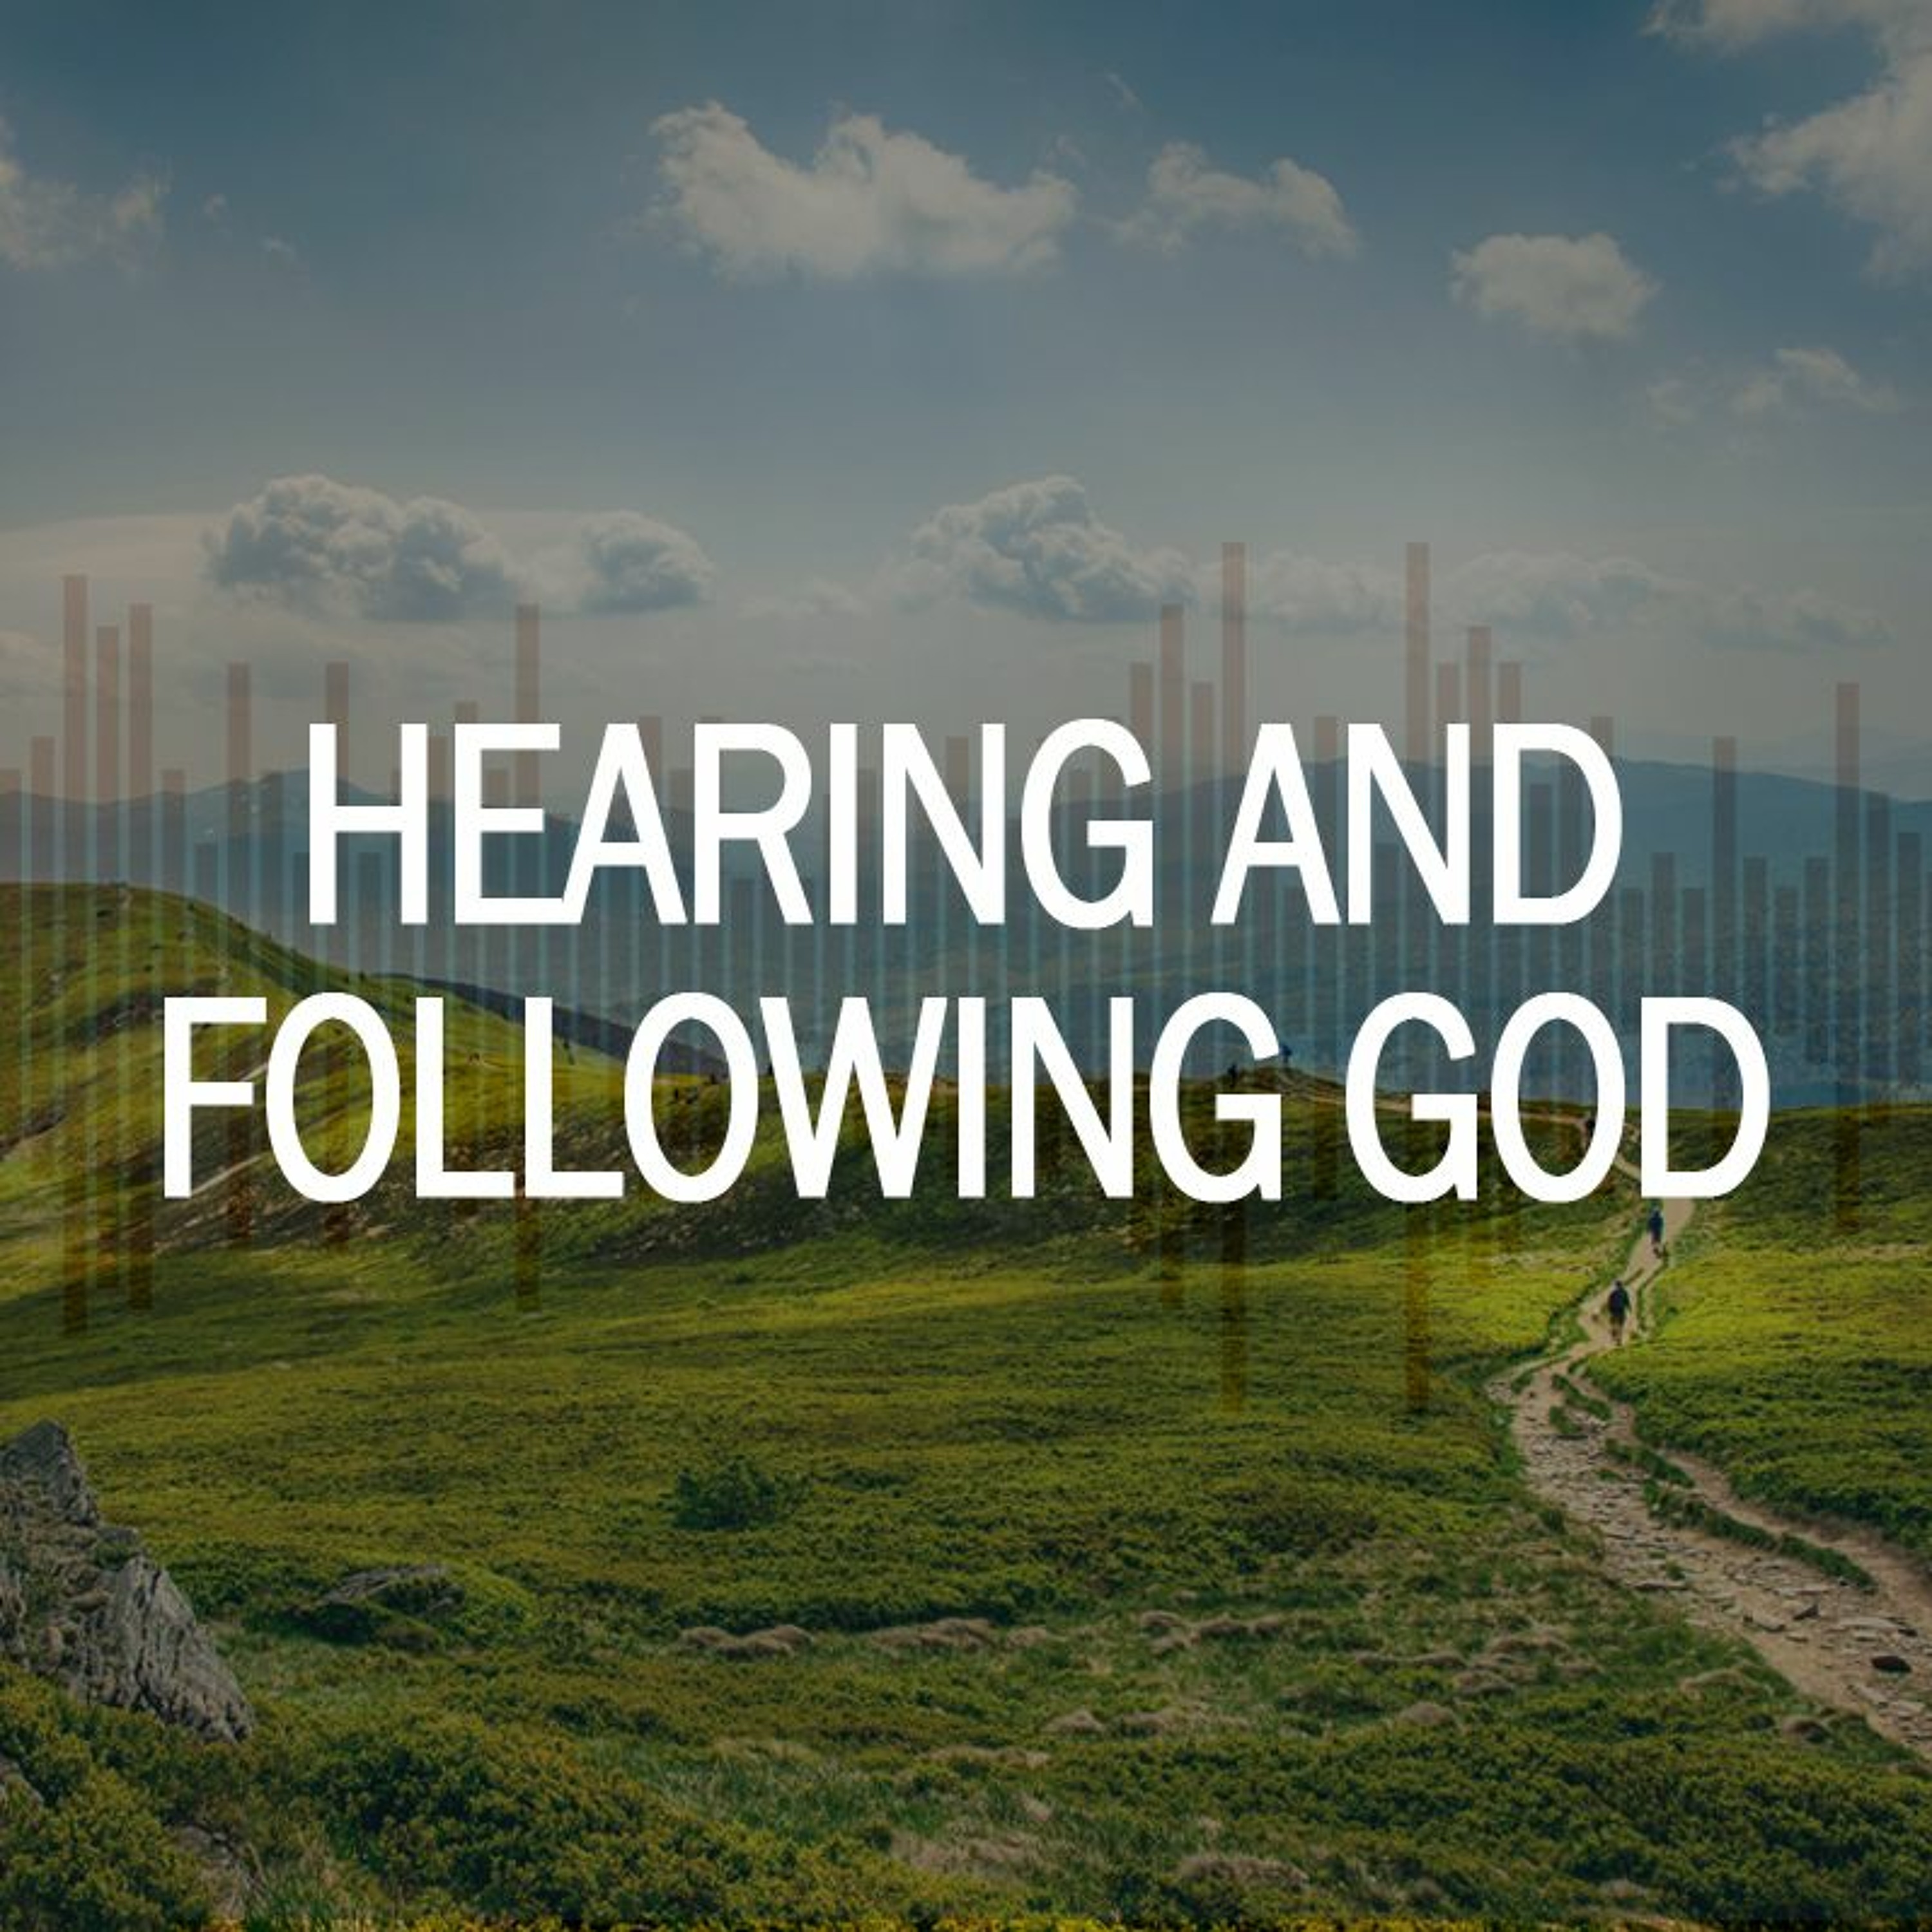 Hearing and following God | Be careful what you ask for